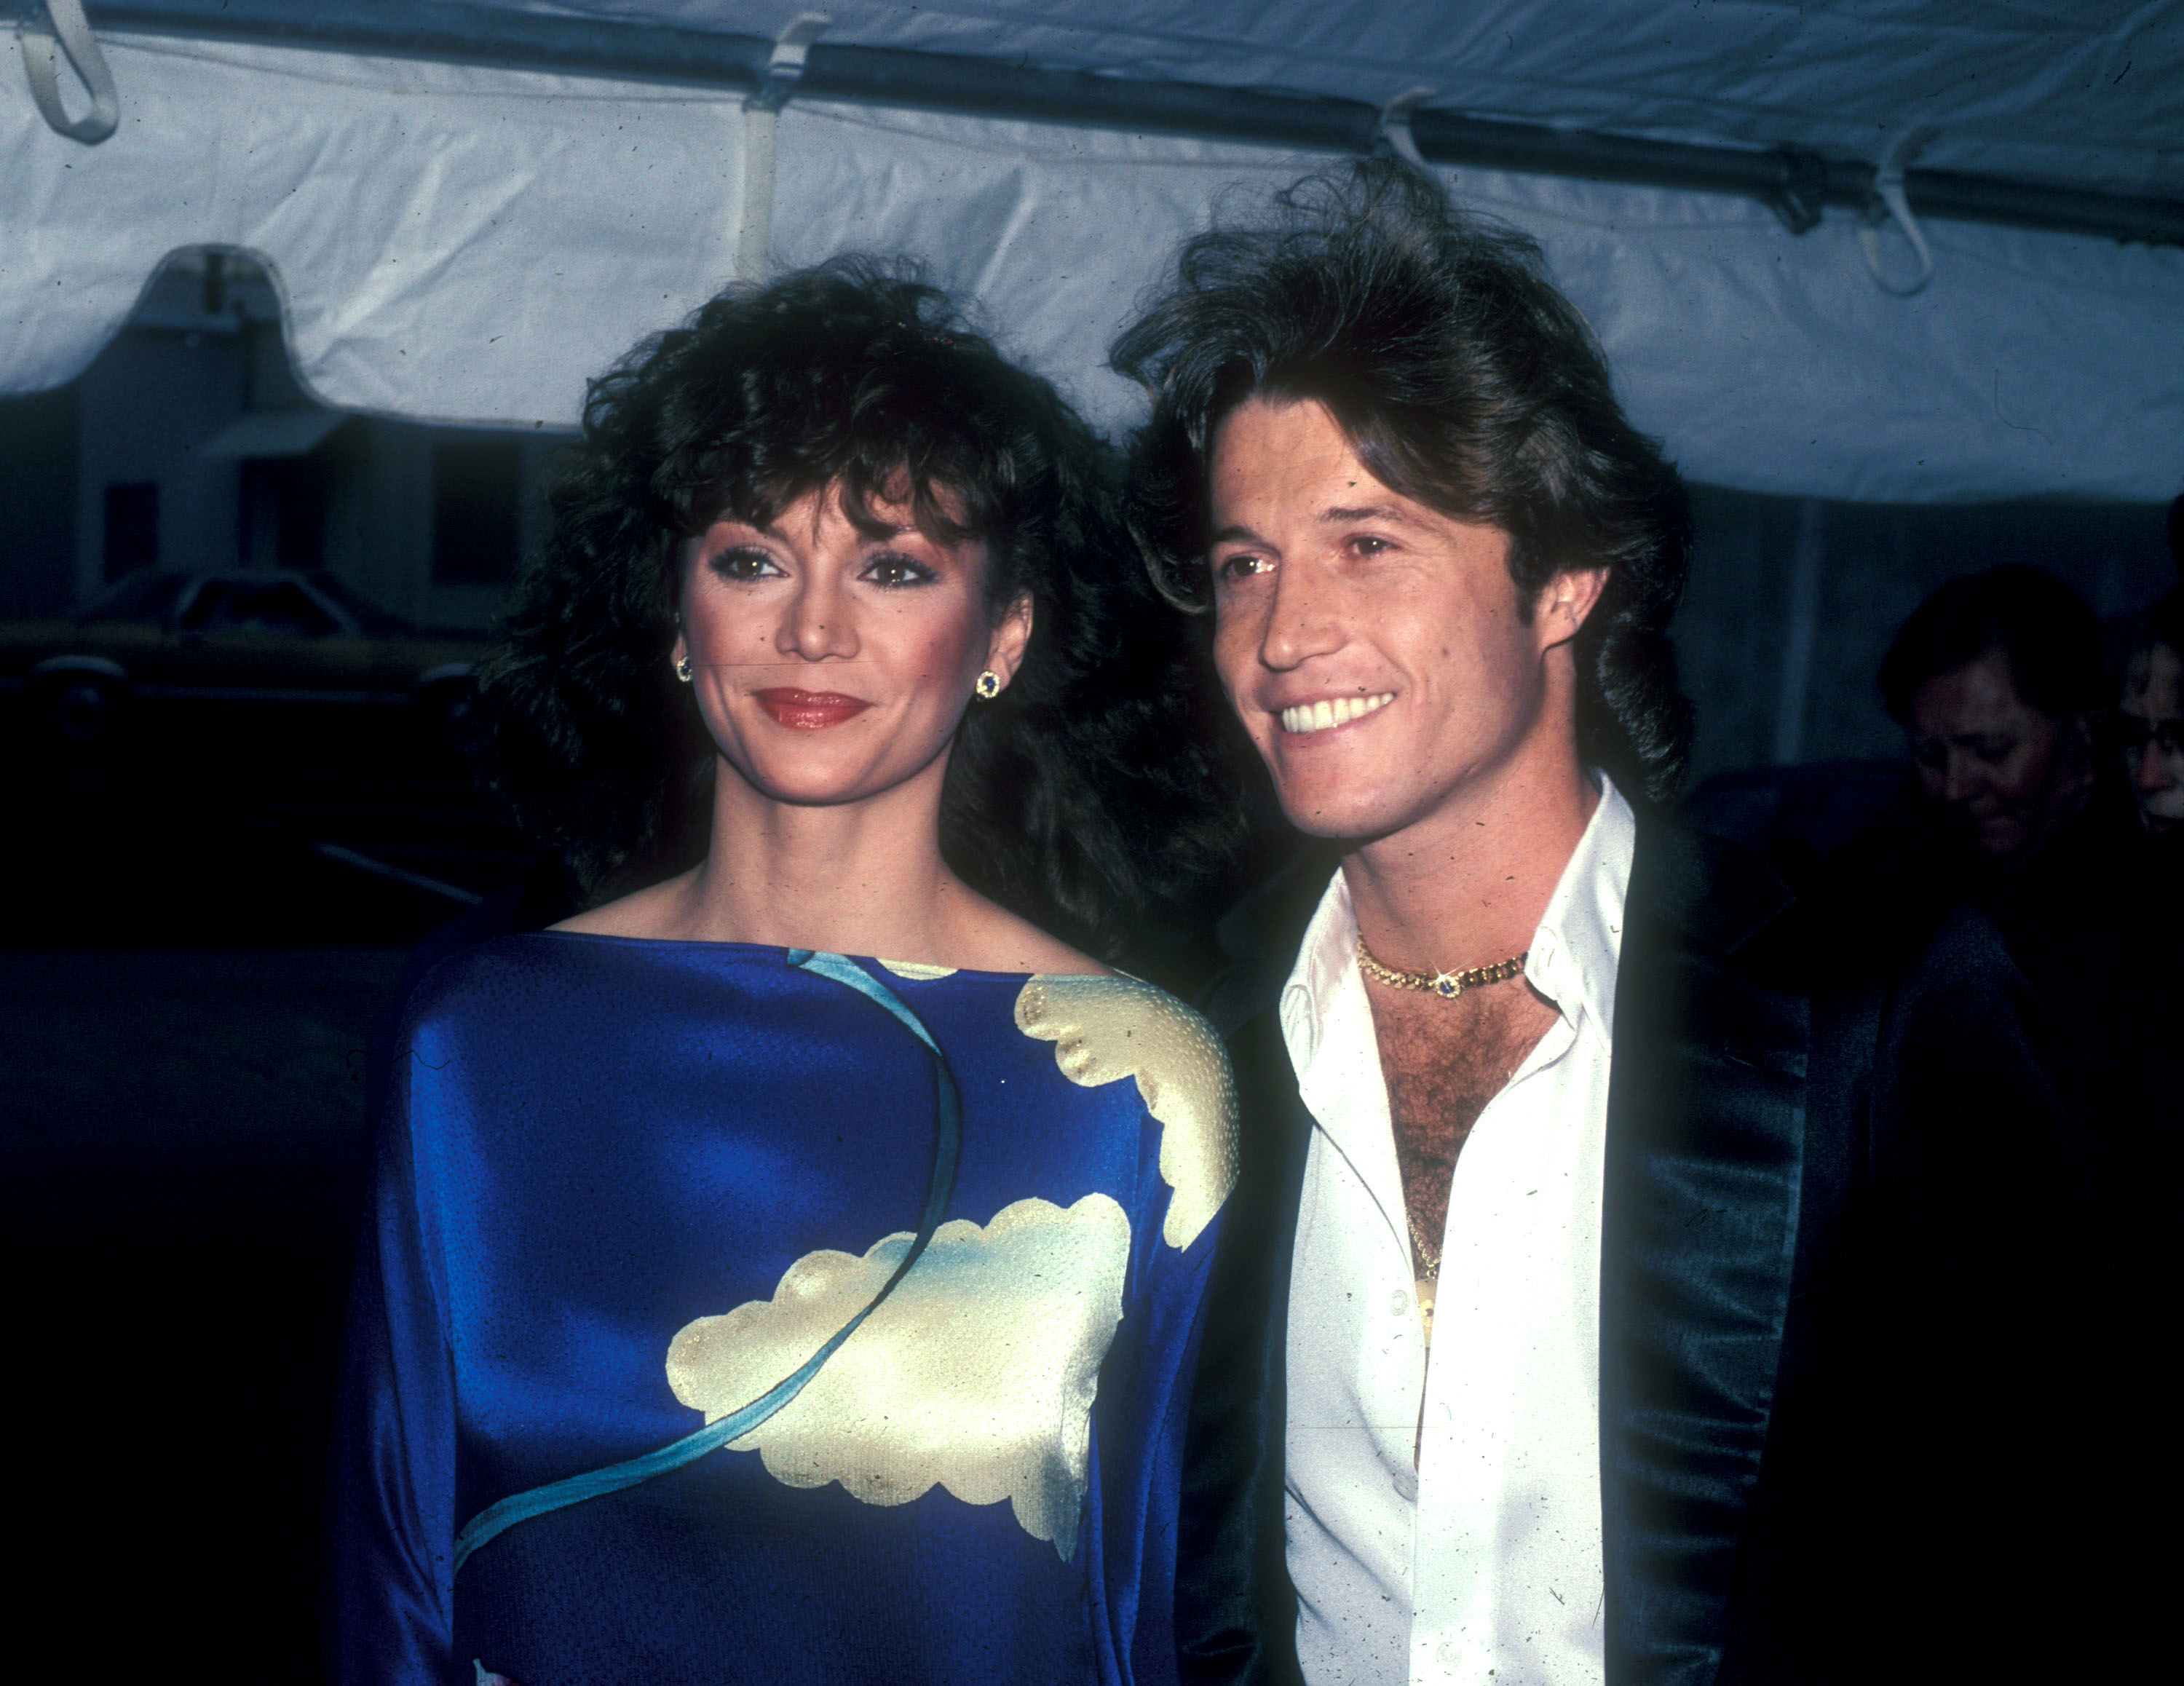 Victoria Principal and Andy Gibb at the Peoples Choice Awards, circa 1981 | Source: Getty Images